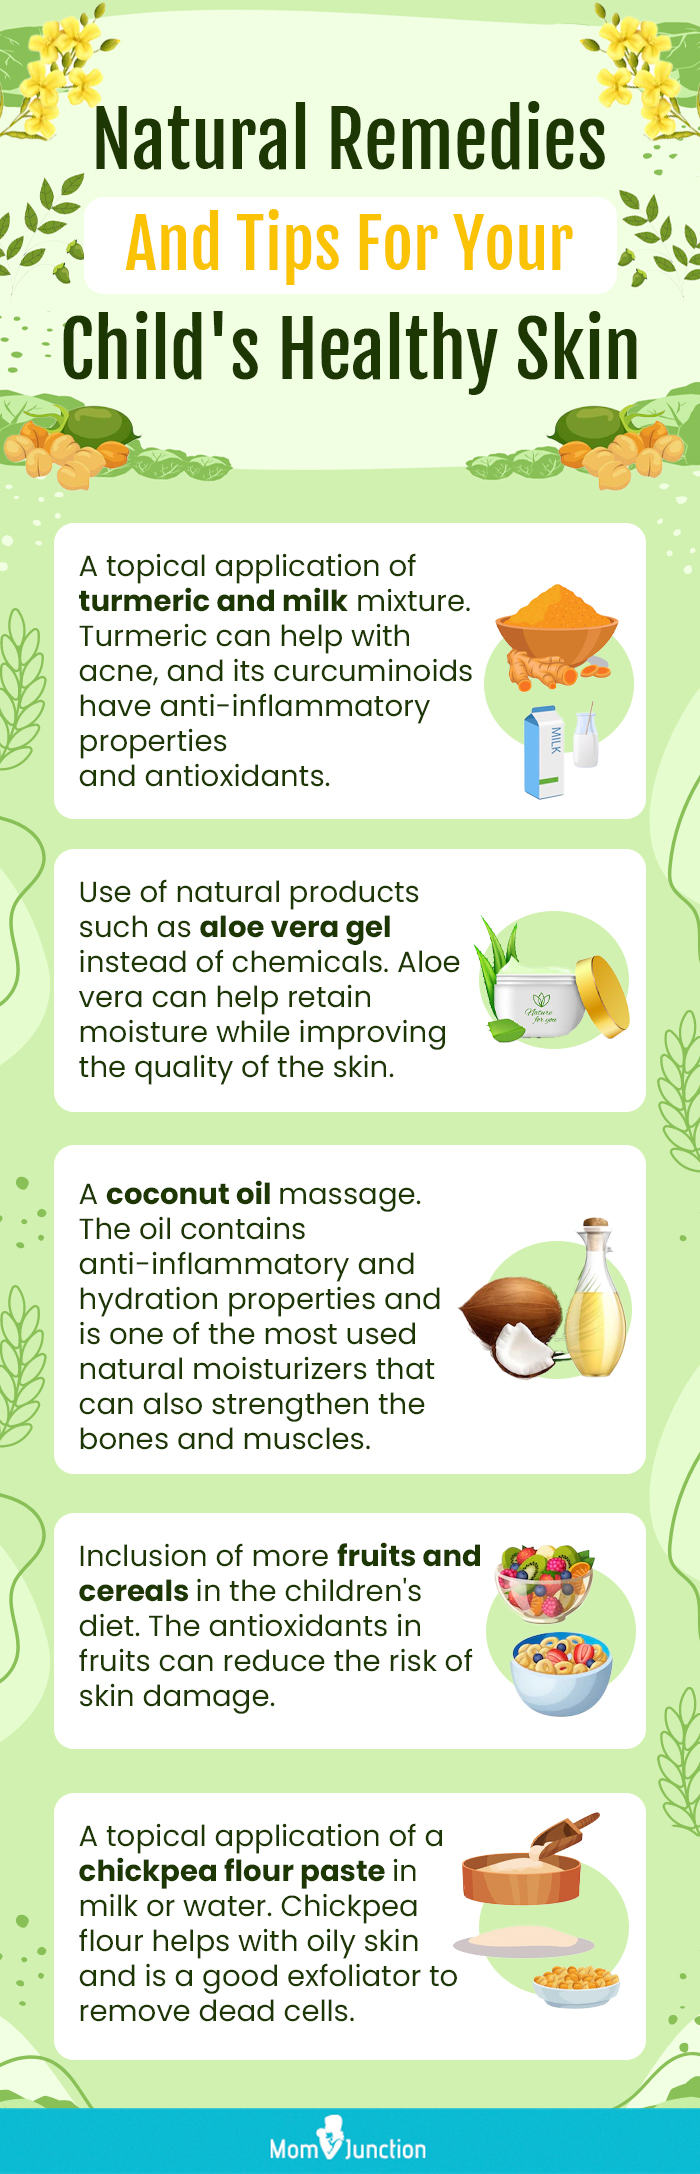 natural remedies and tips for your child's healthy skin (infographic)